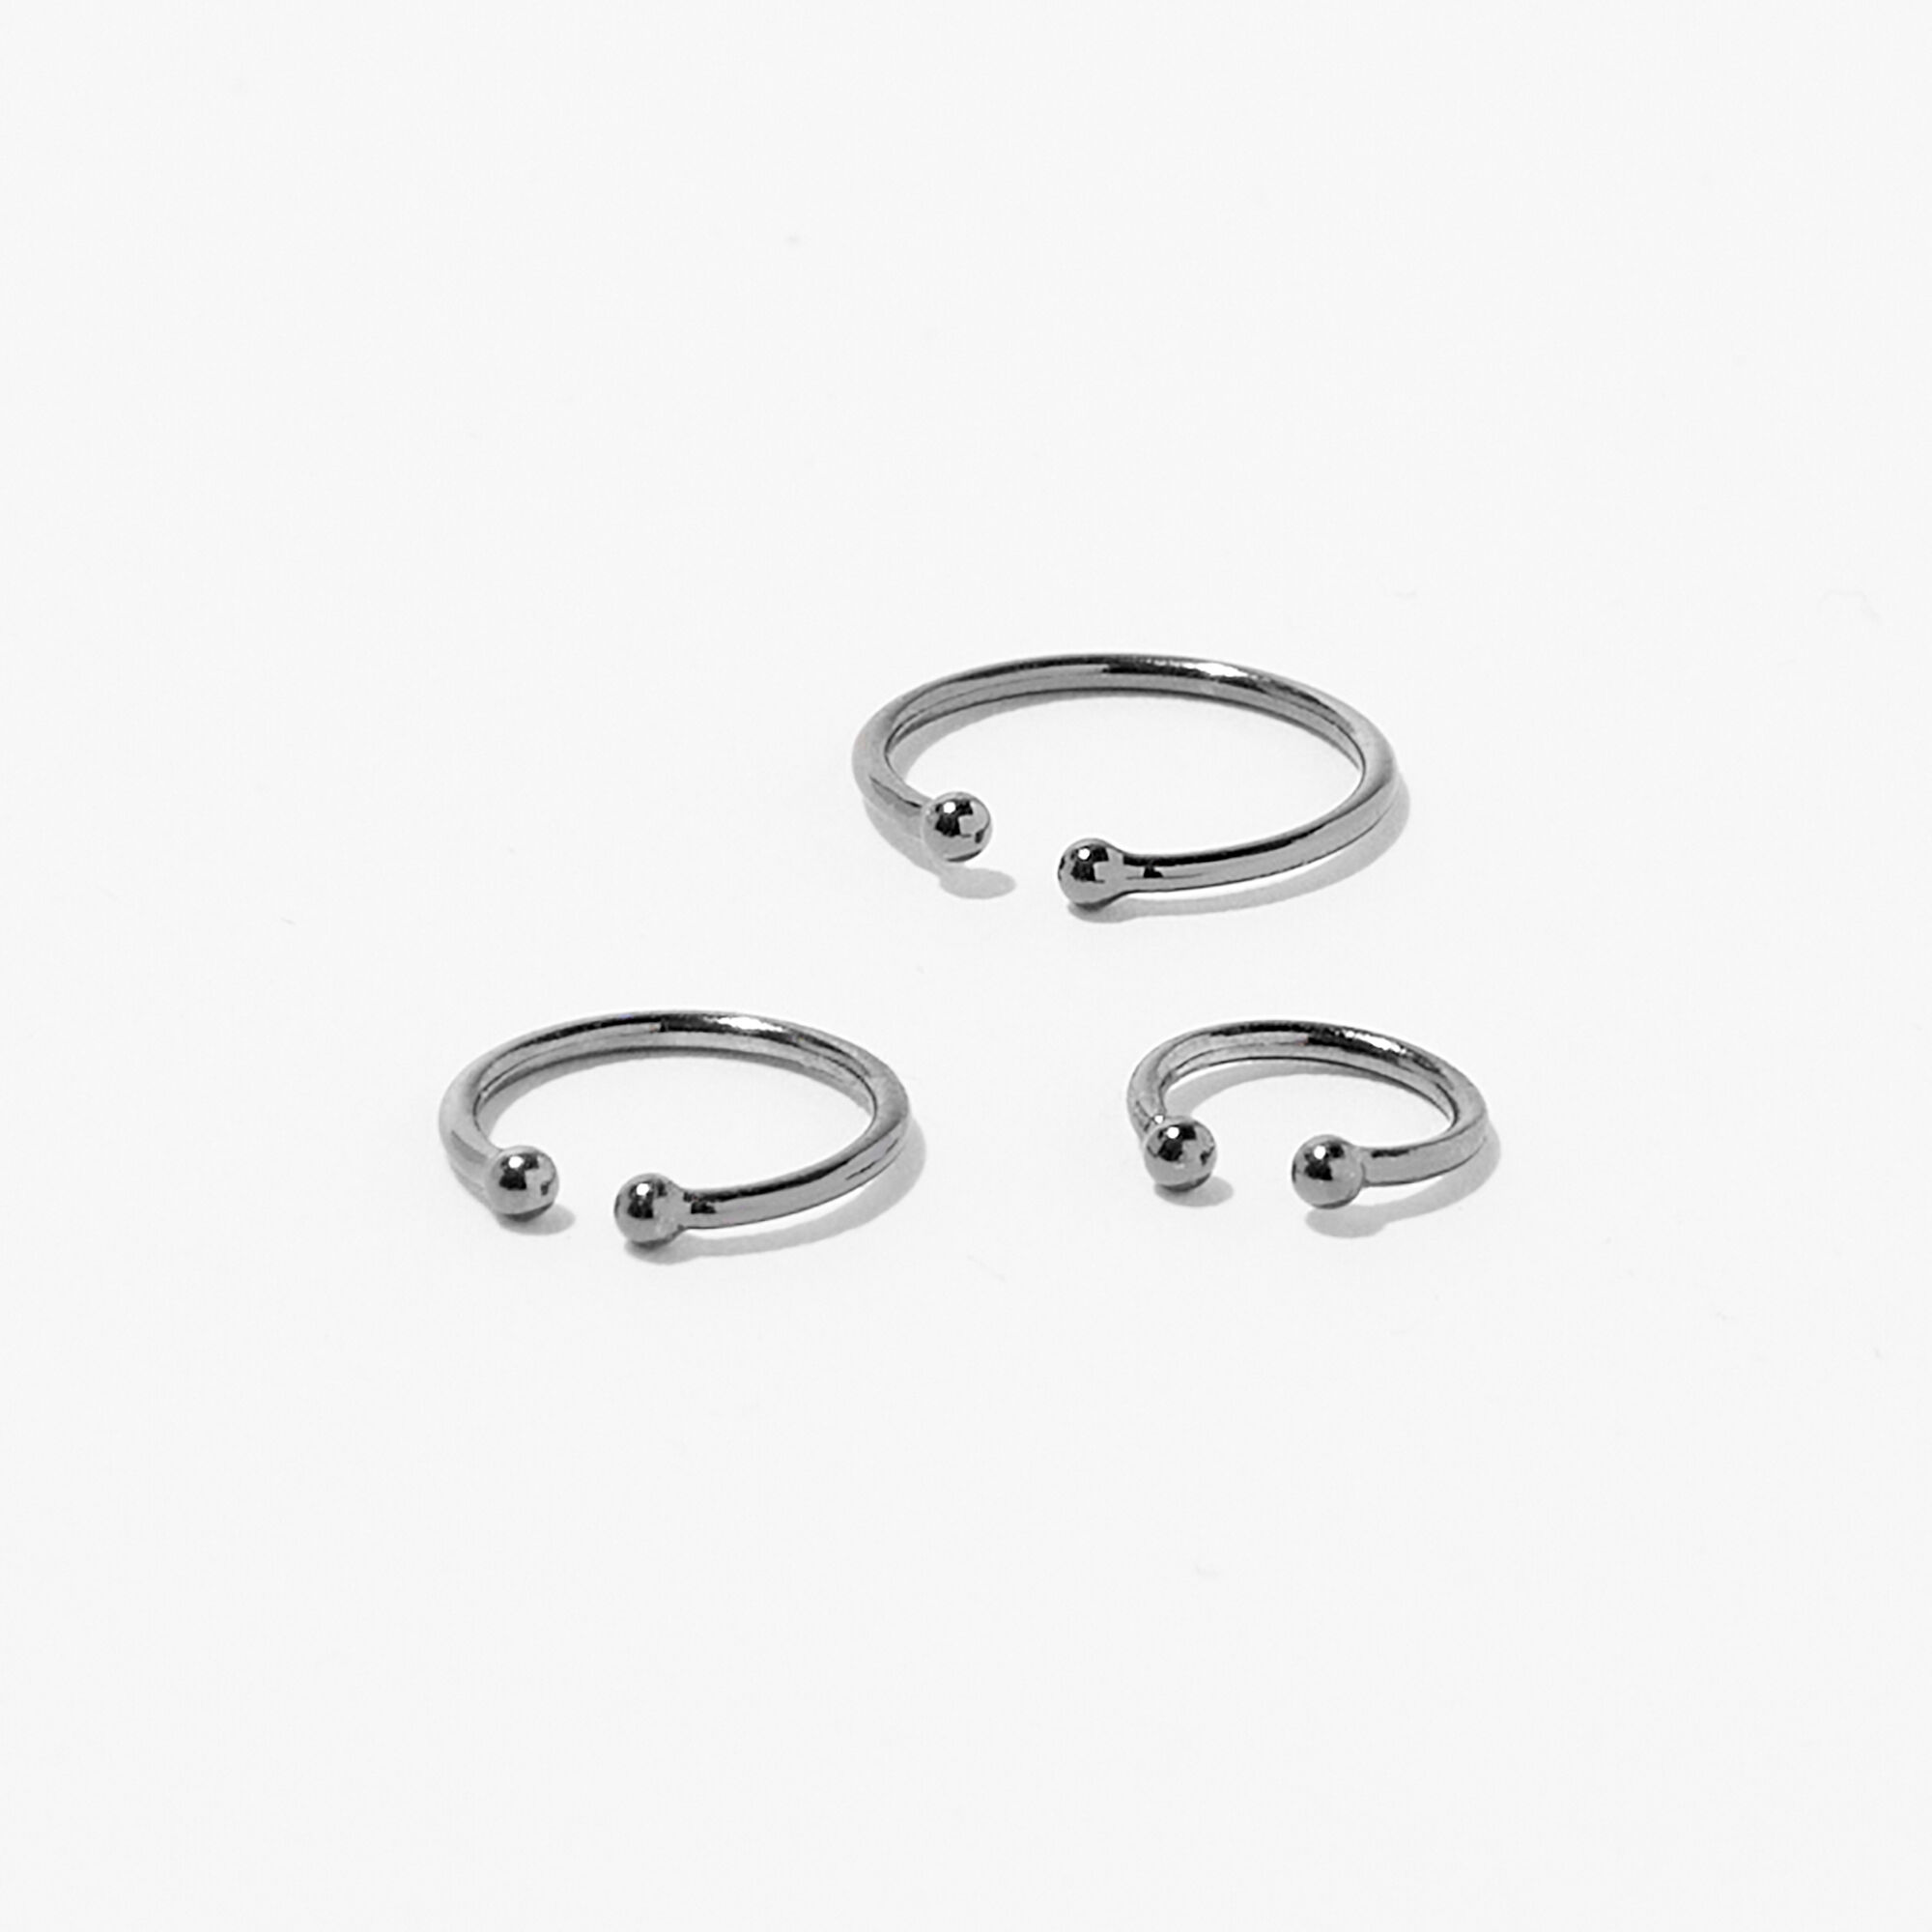 View Claires Hematite Mixed Faux Nose Rings 3 Pack information